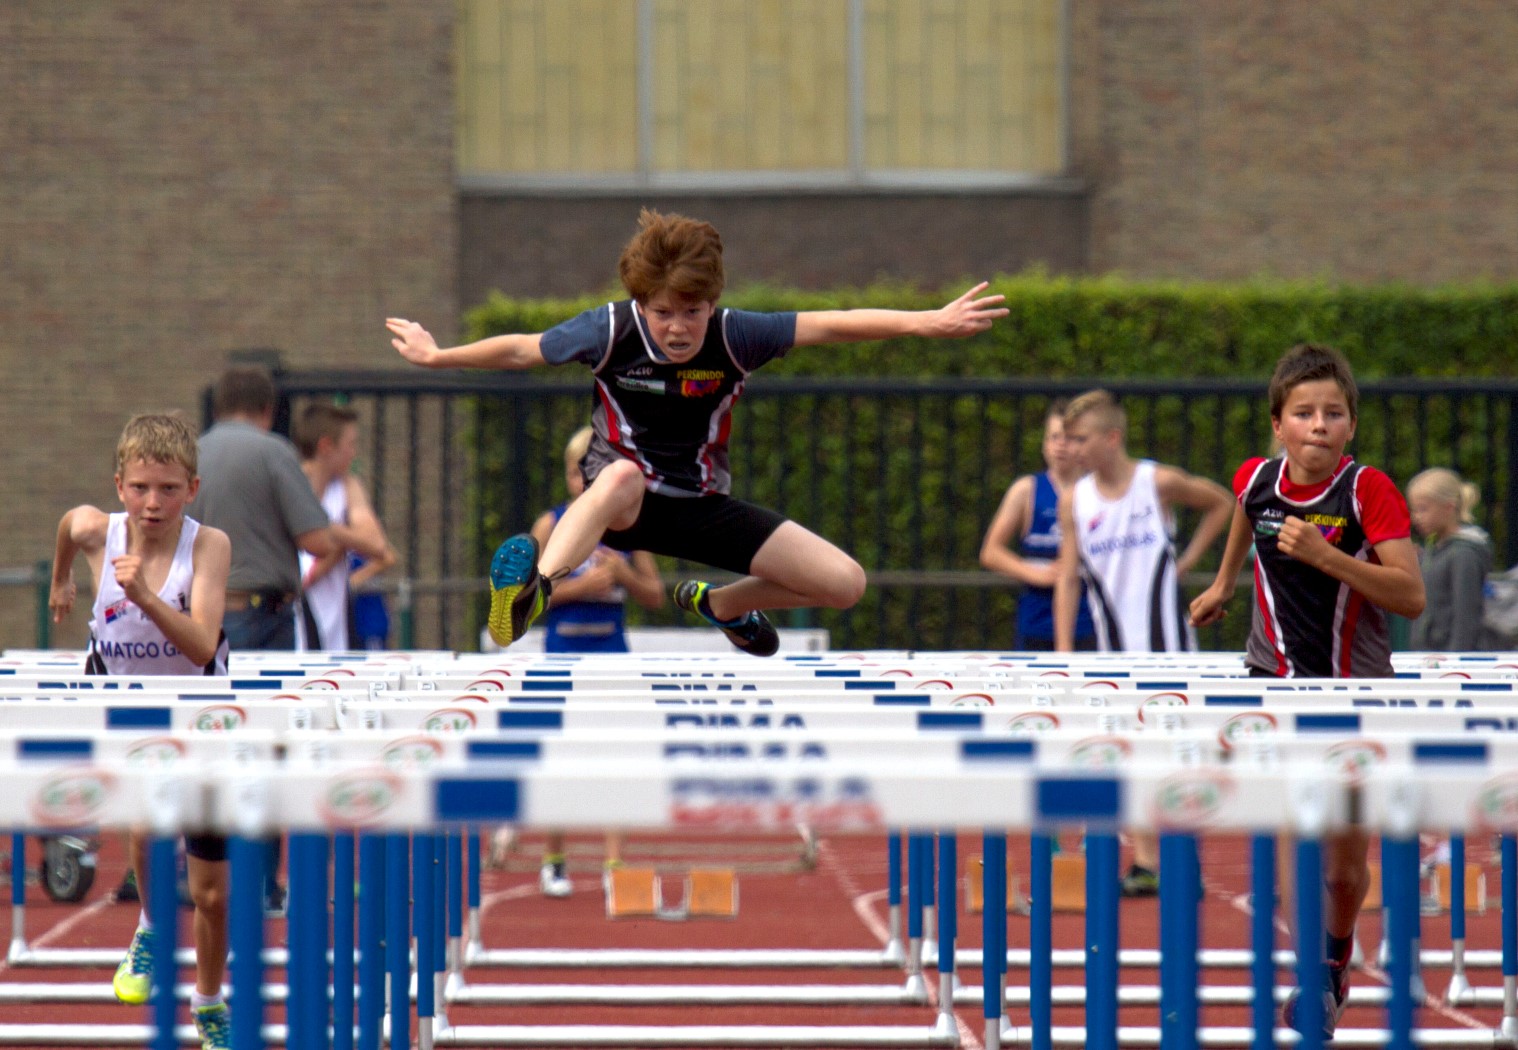 a man leaps above the hurdles to win a race